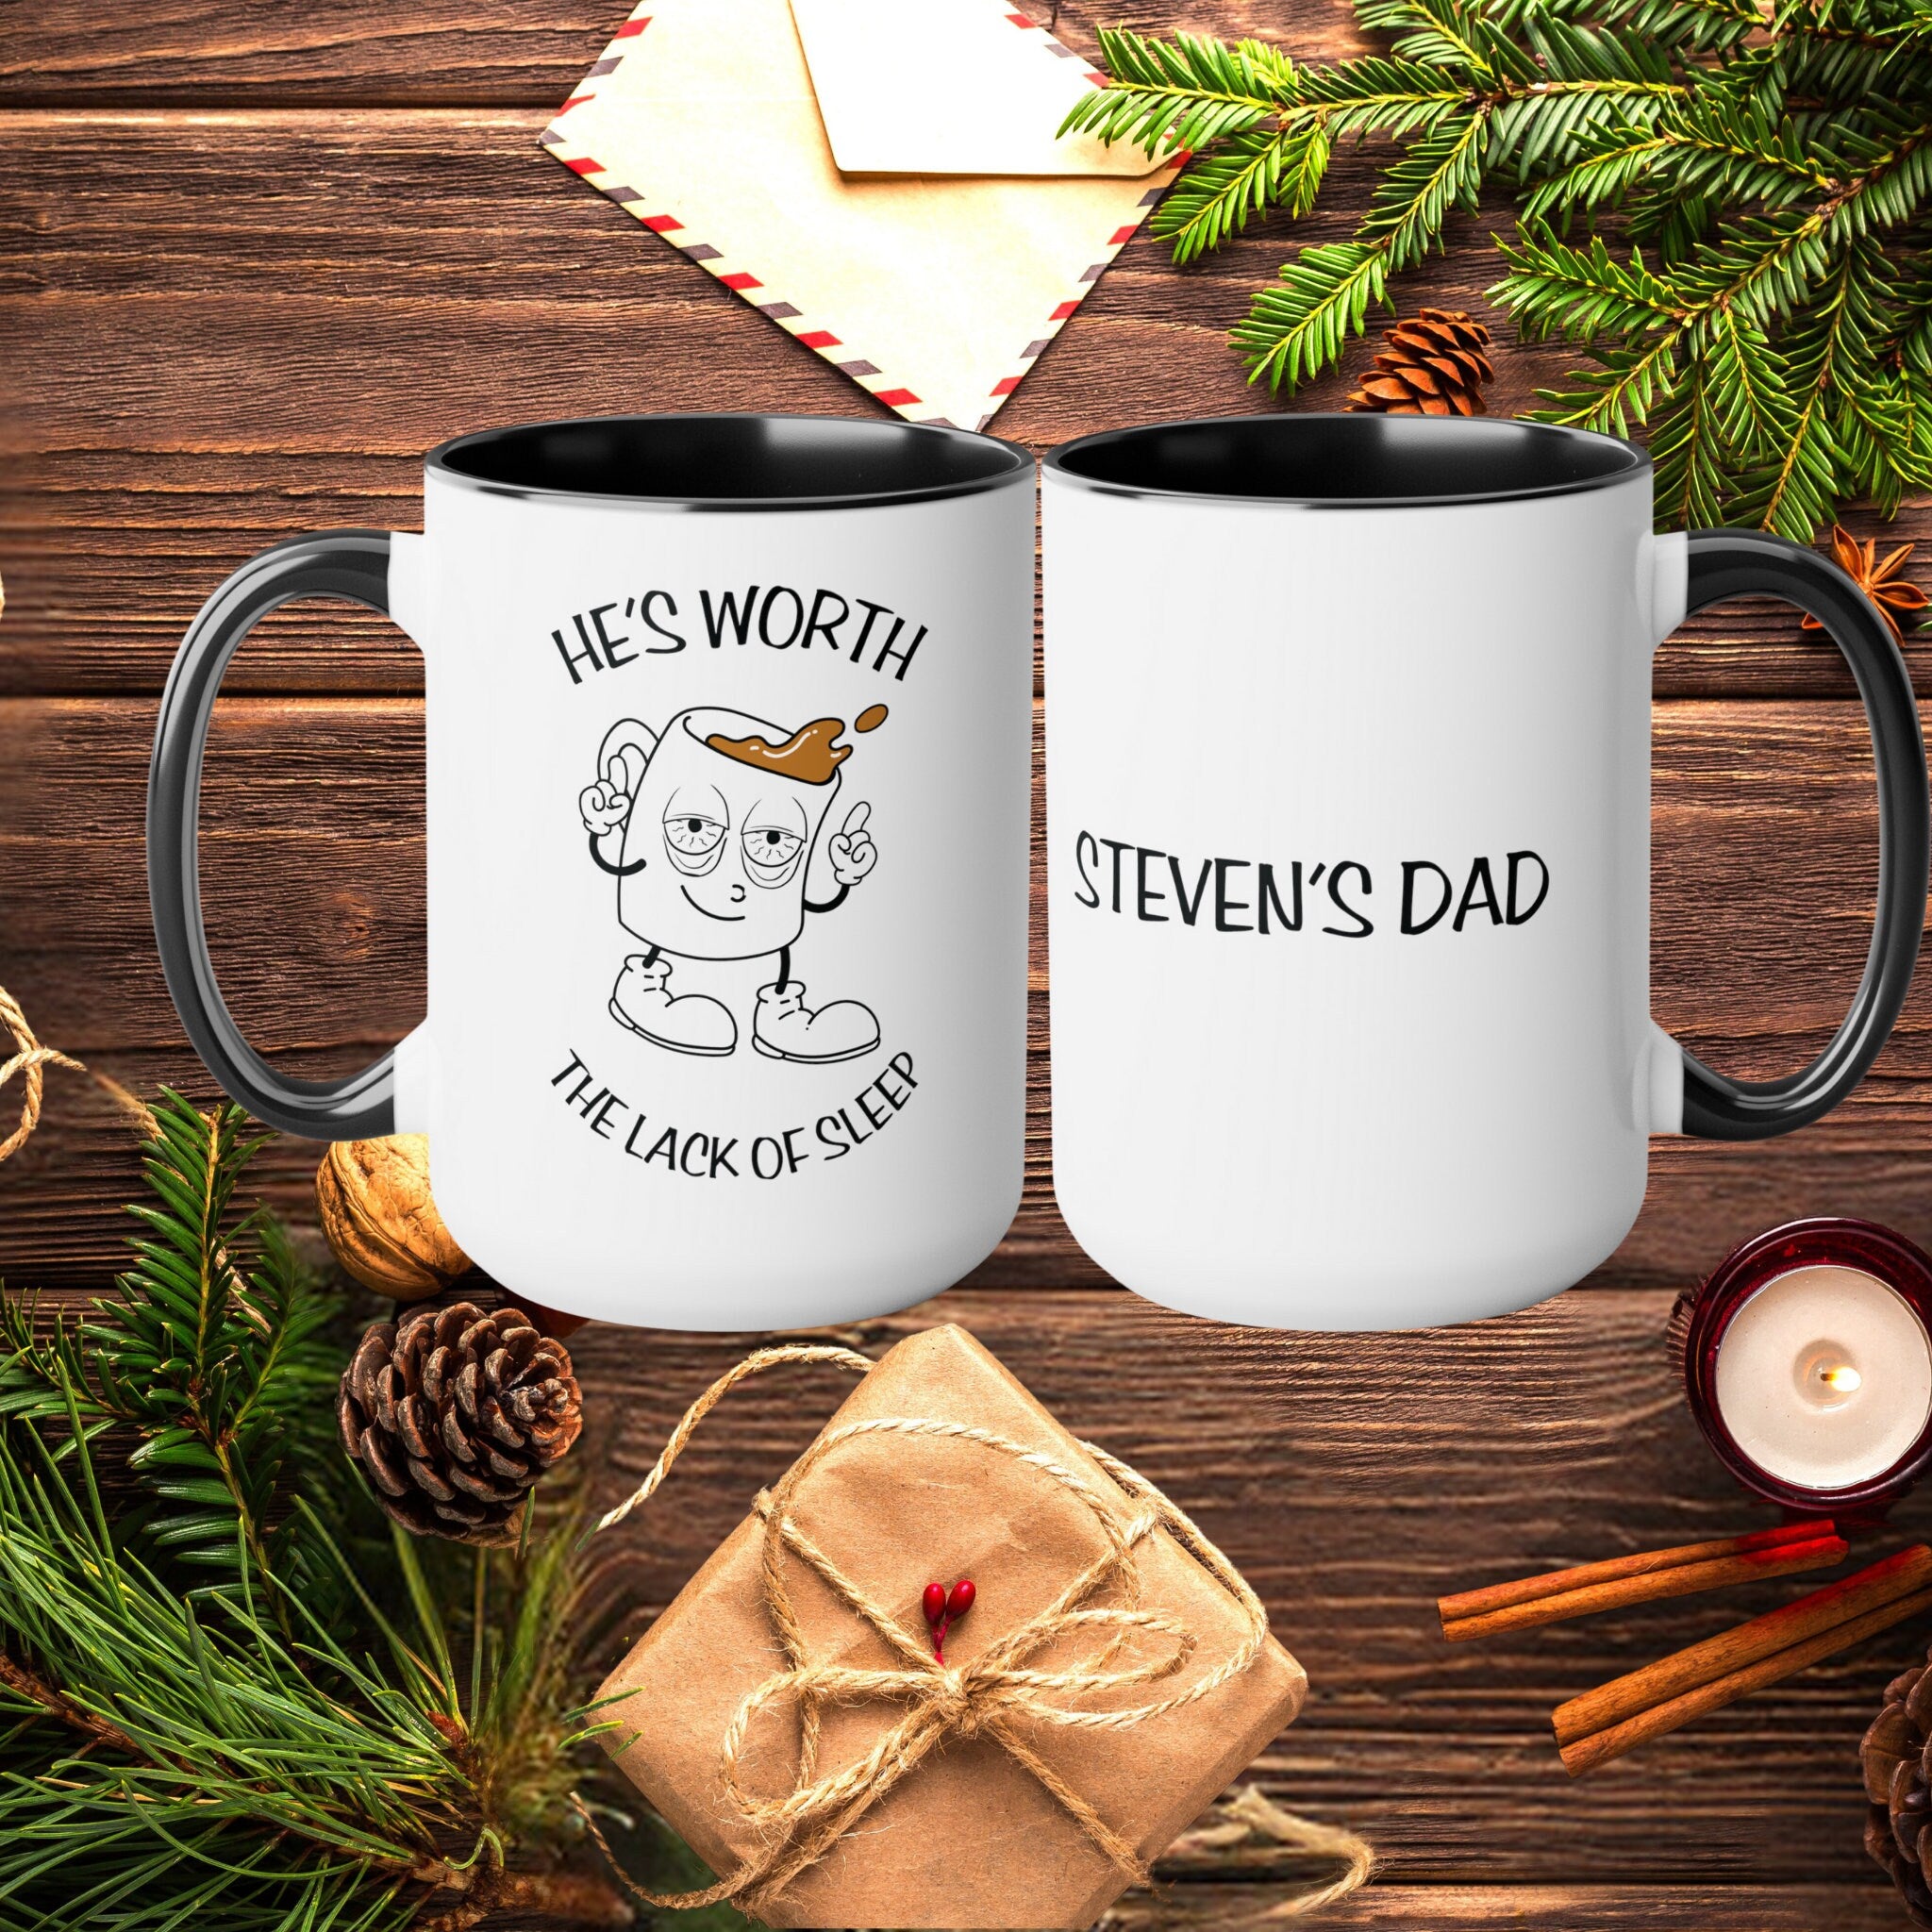 Gifts for Dad - 3 in 15 makes 5